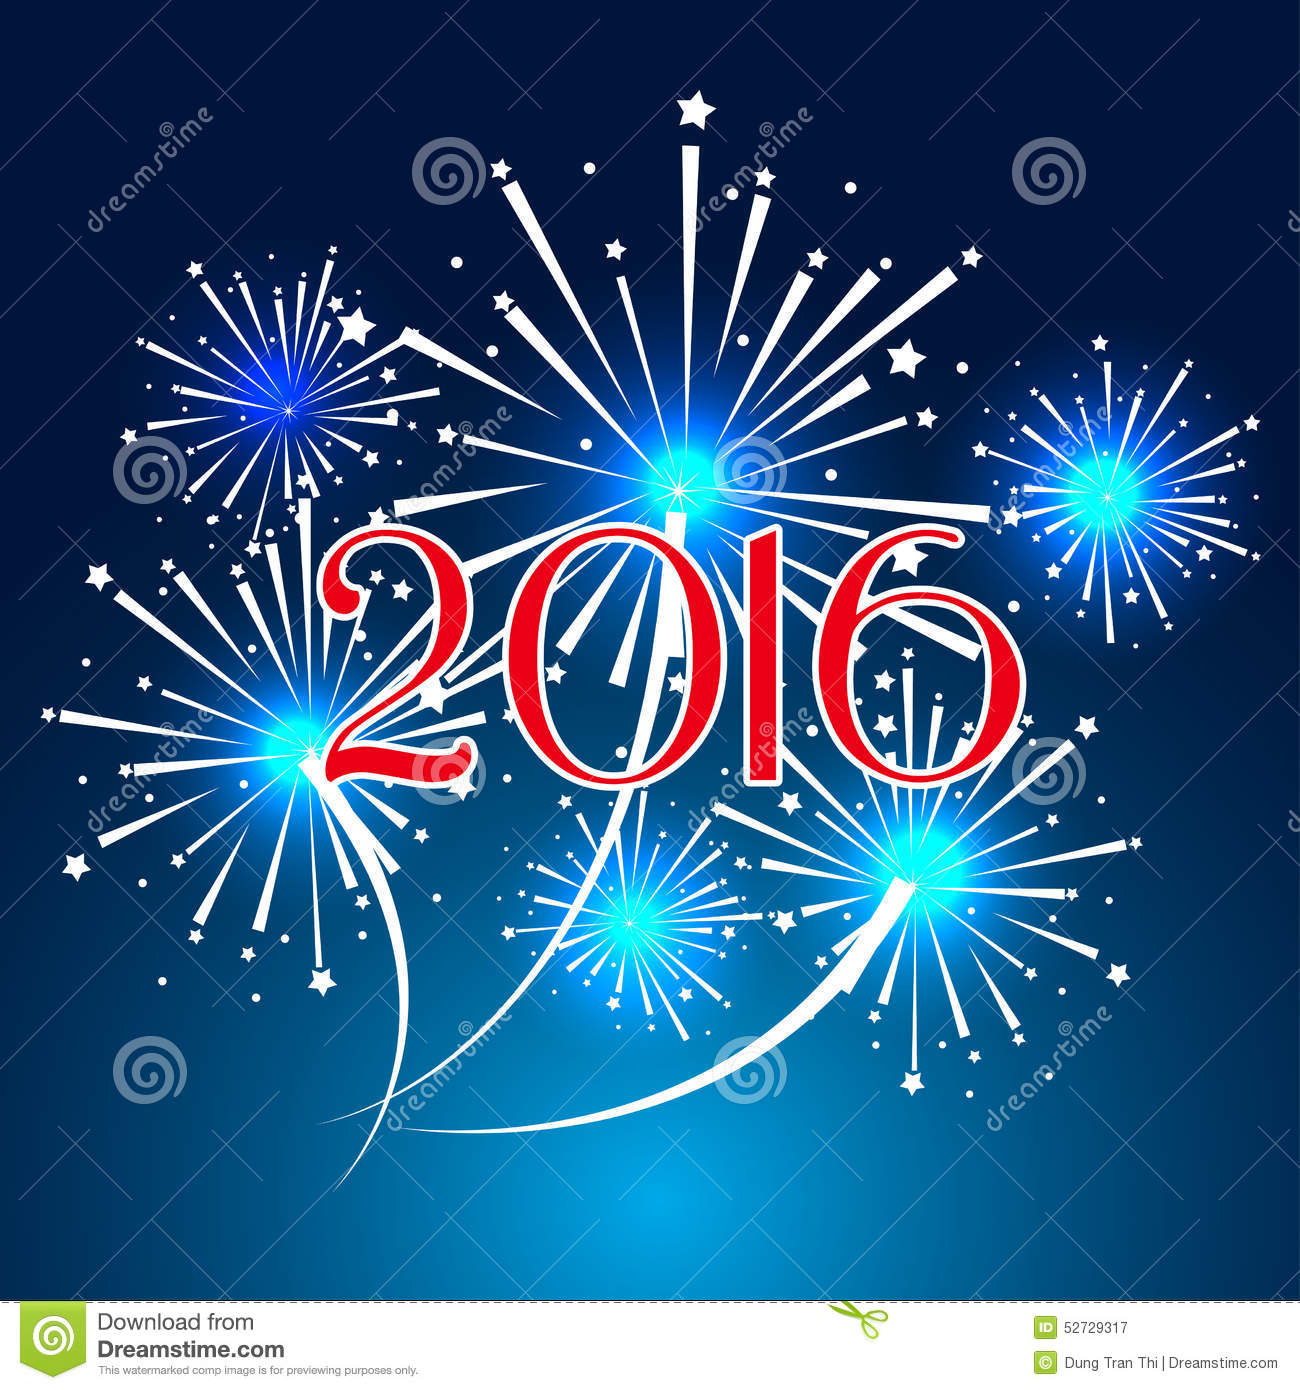 Happy New Year Image Wallpaper Puter